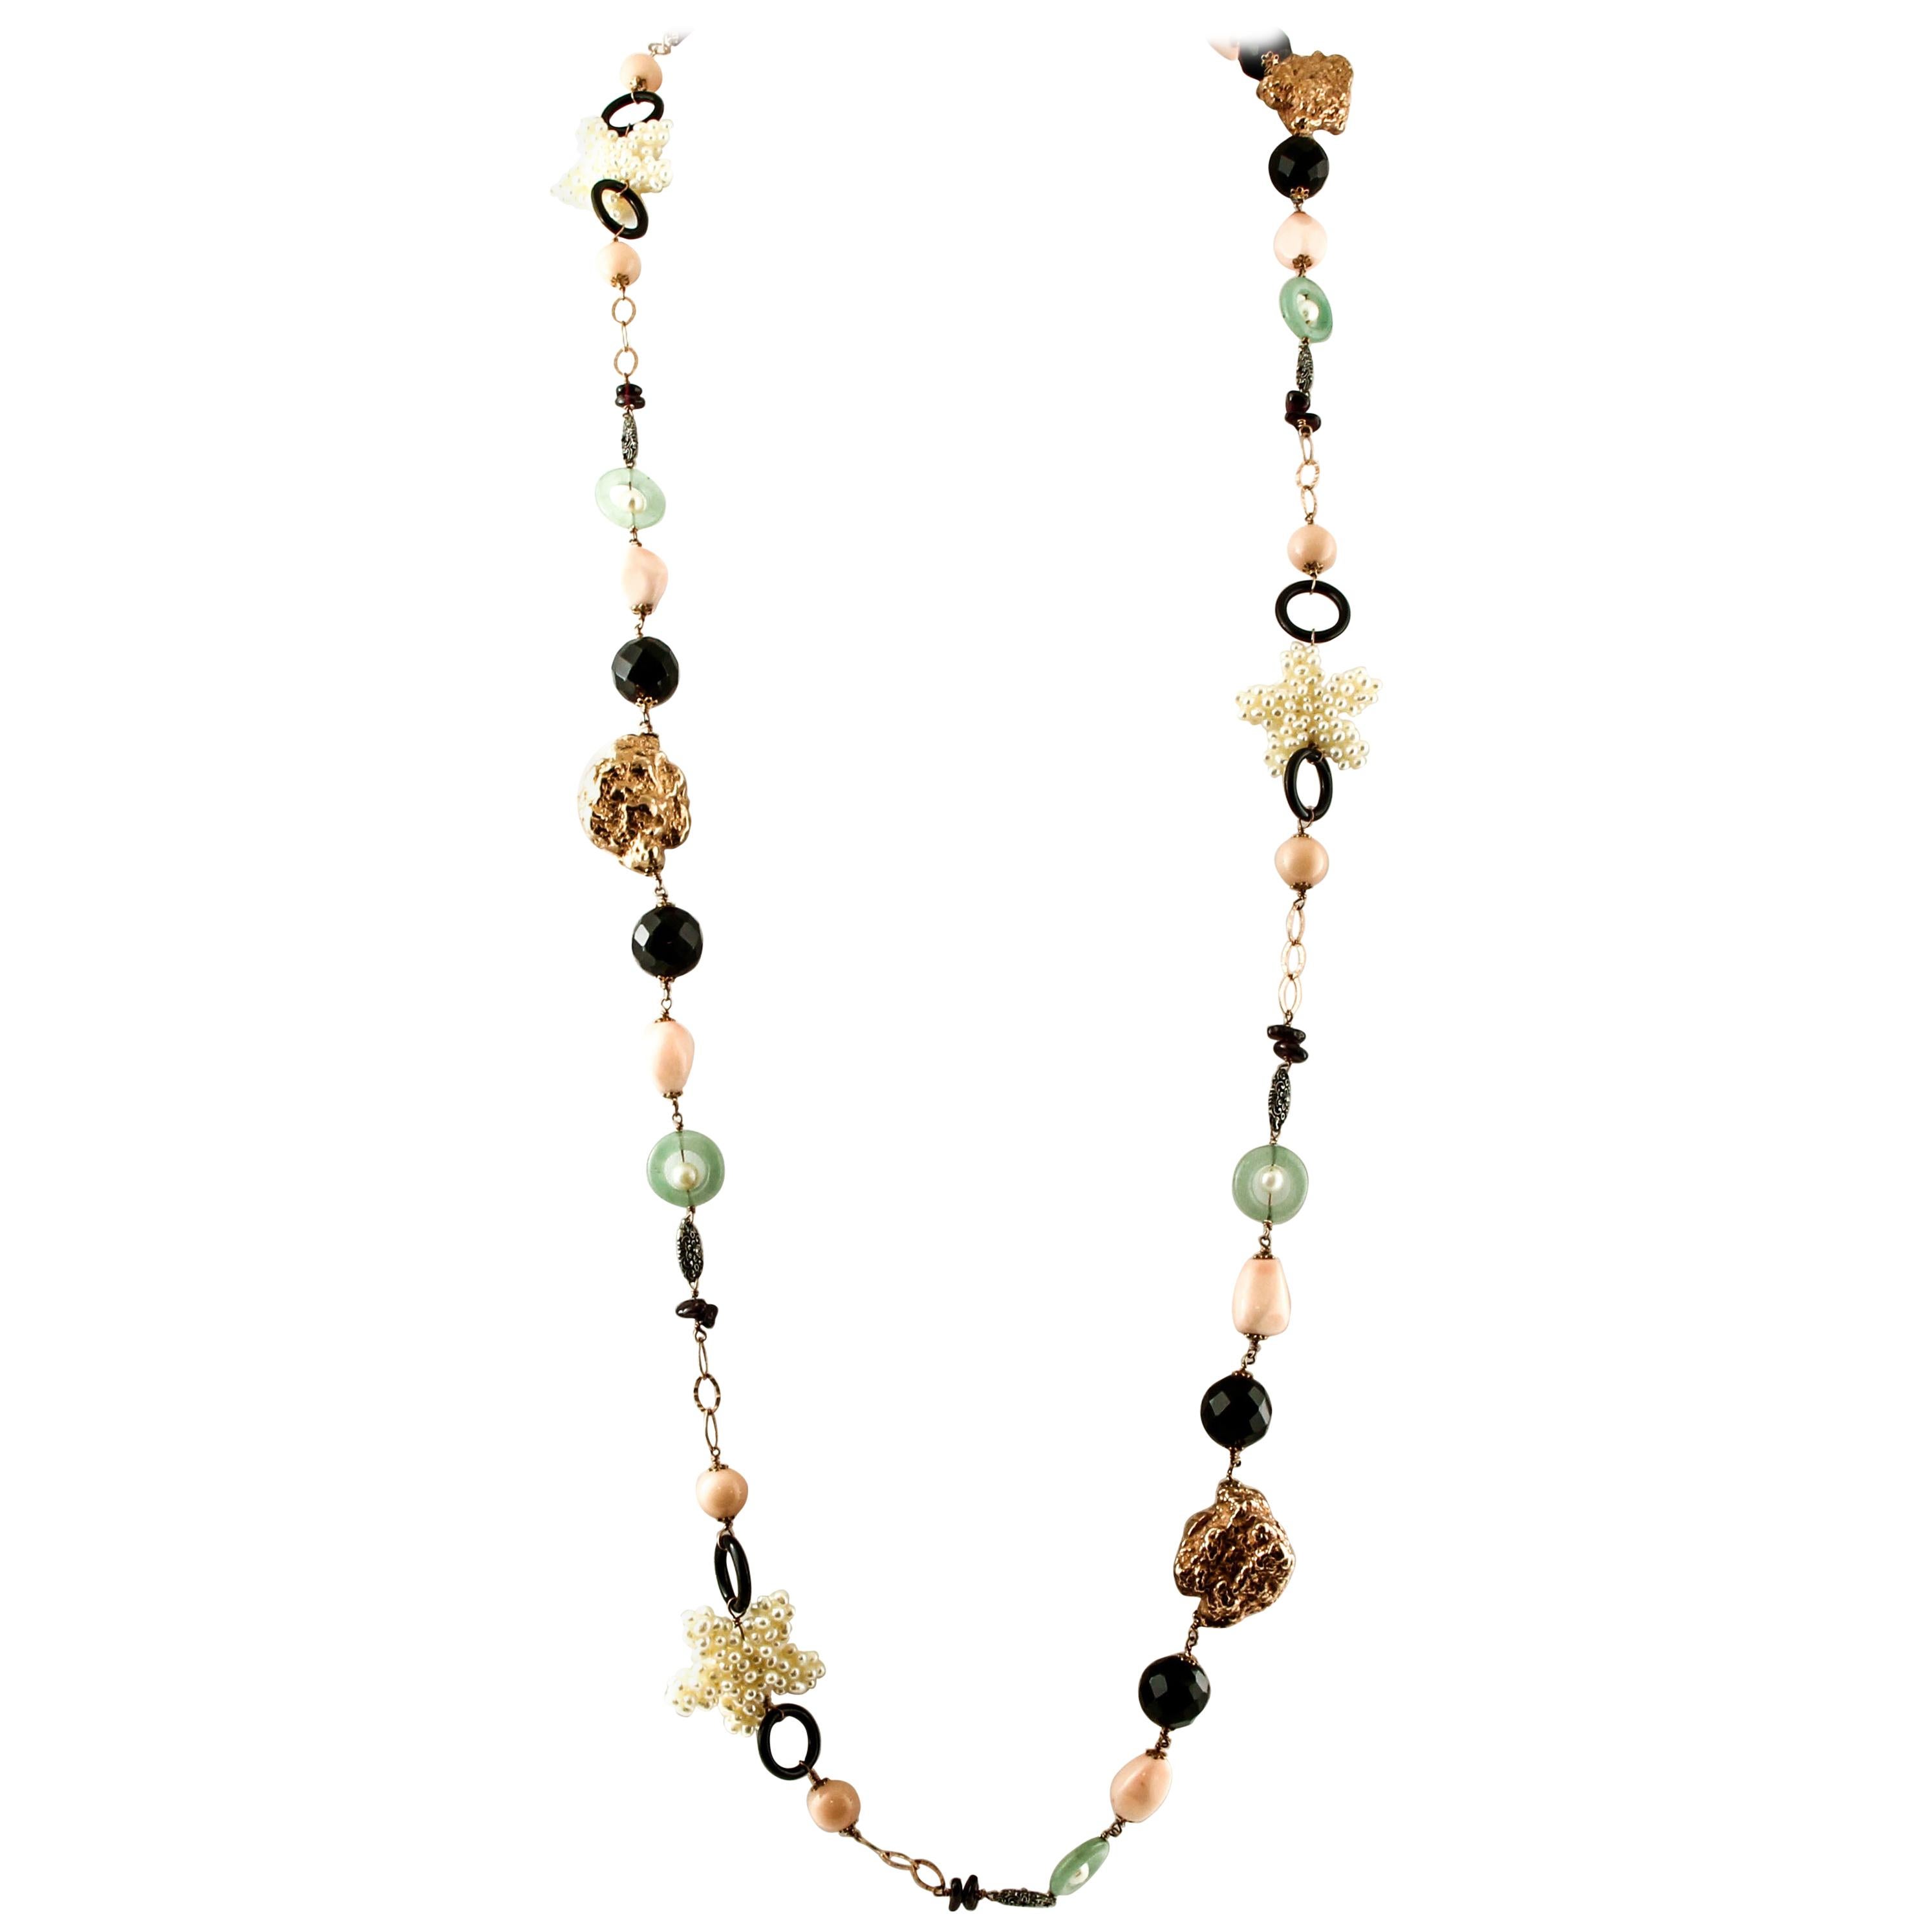 Pearls, Agate, Garnets, 9 Karat Rose Gold and Silver Long Necklace